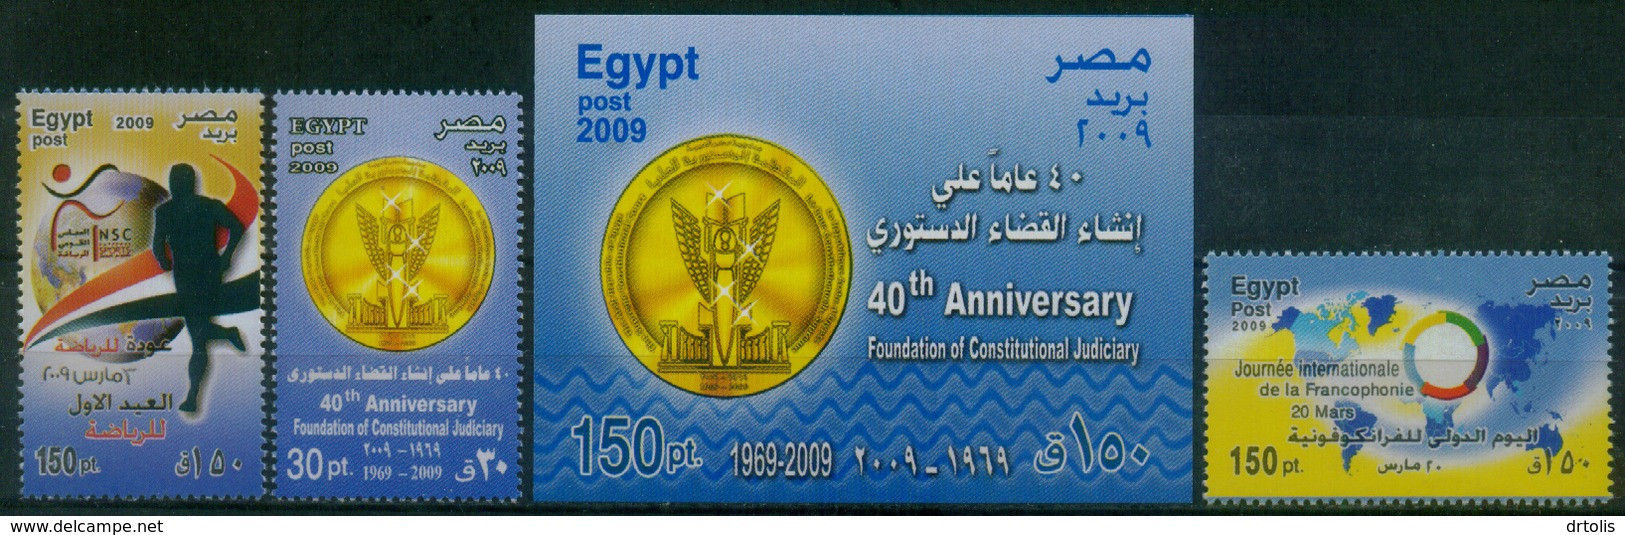 EGYPT / 2009 / COMPLETE YEAR ISSUES / MNH / VF / 7 SCANS . - Nuevos